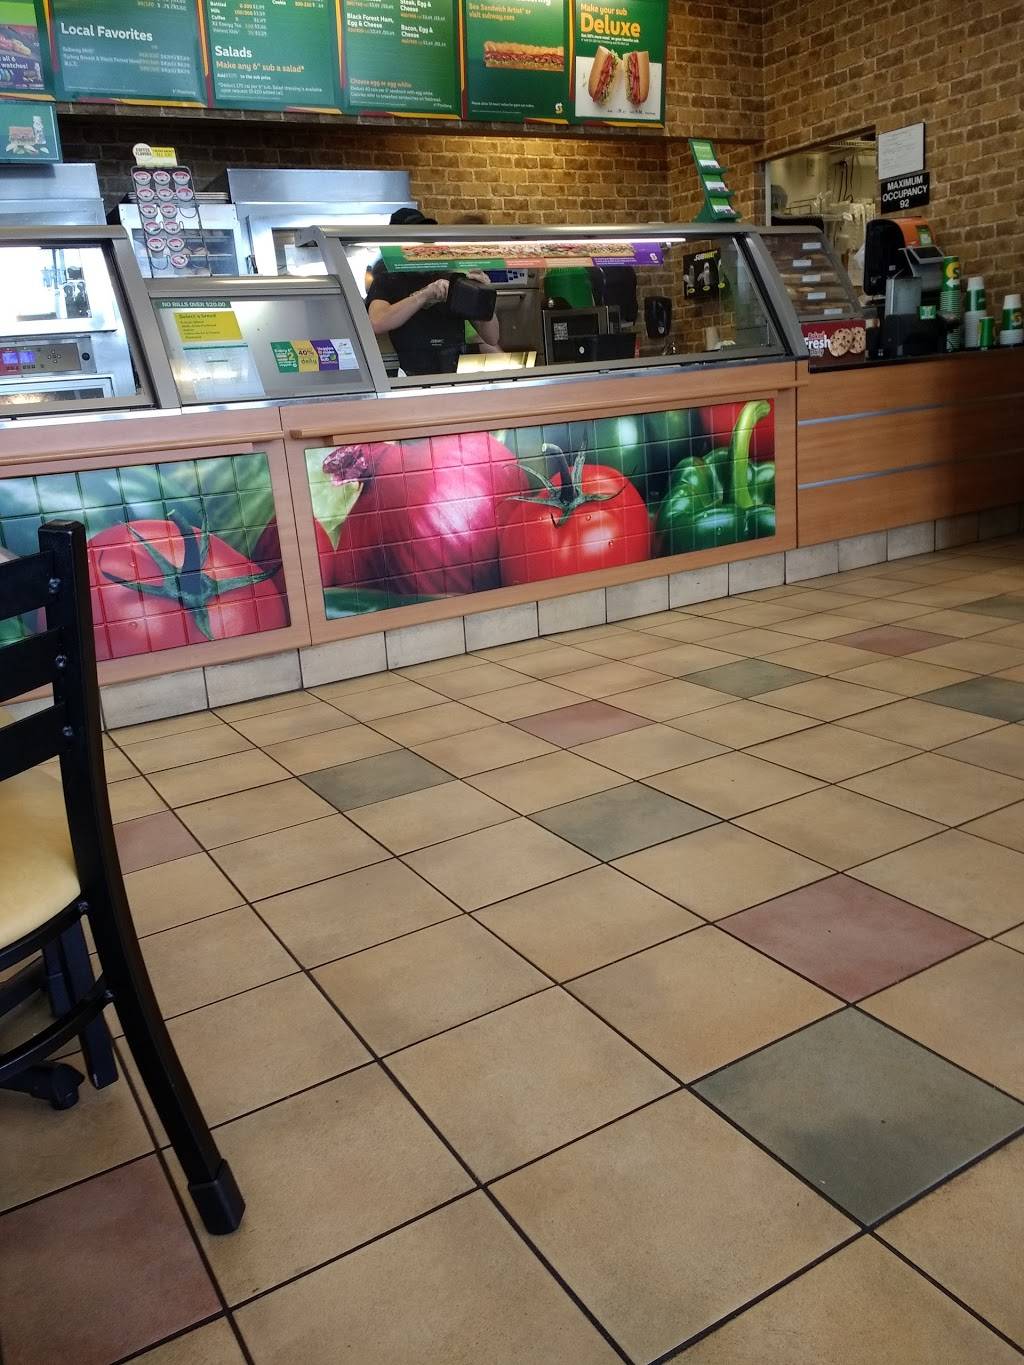 Subway | 301 Clifford Center Dr Suite 131, Fort Worth, TX 76108, USA | Phone: (817) 246-7144